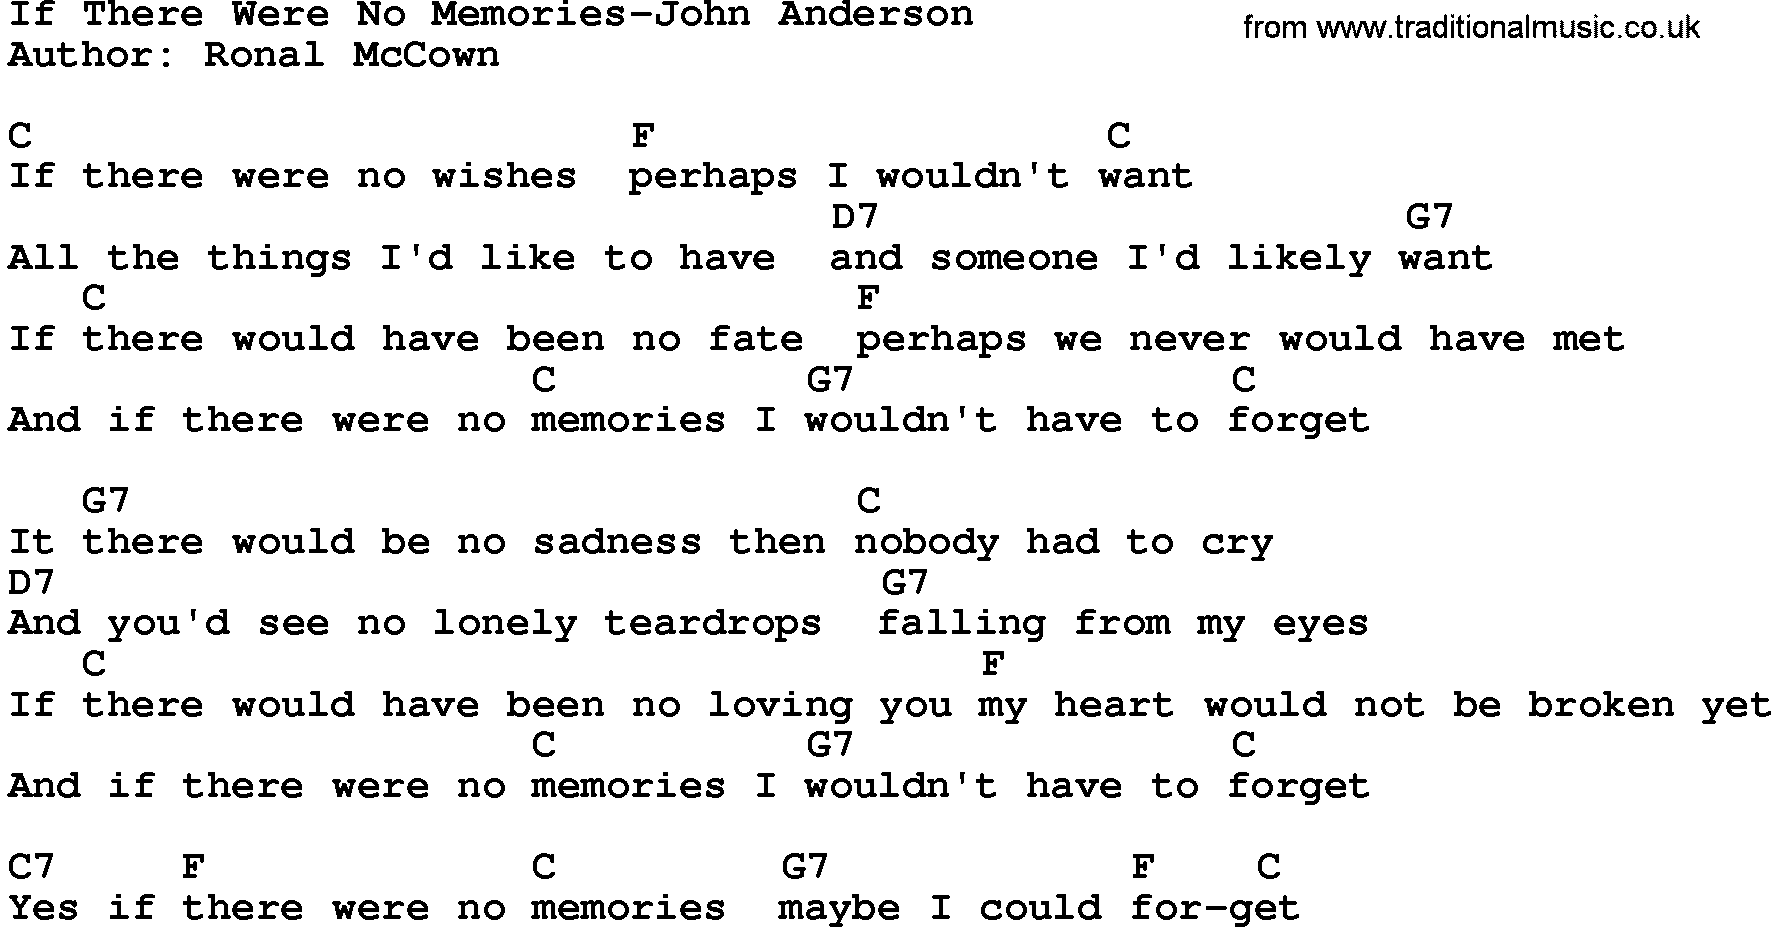 Country music song: If There Were No Memories-John Anderson lyrics and chords